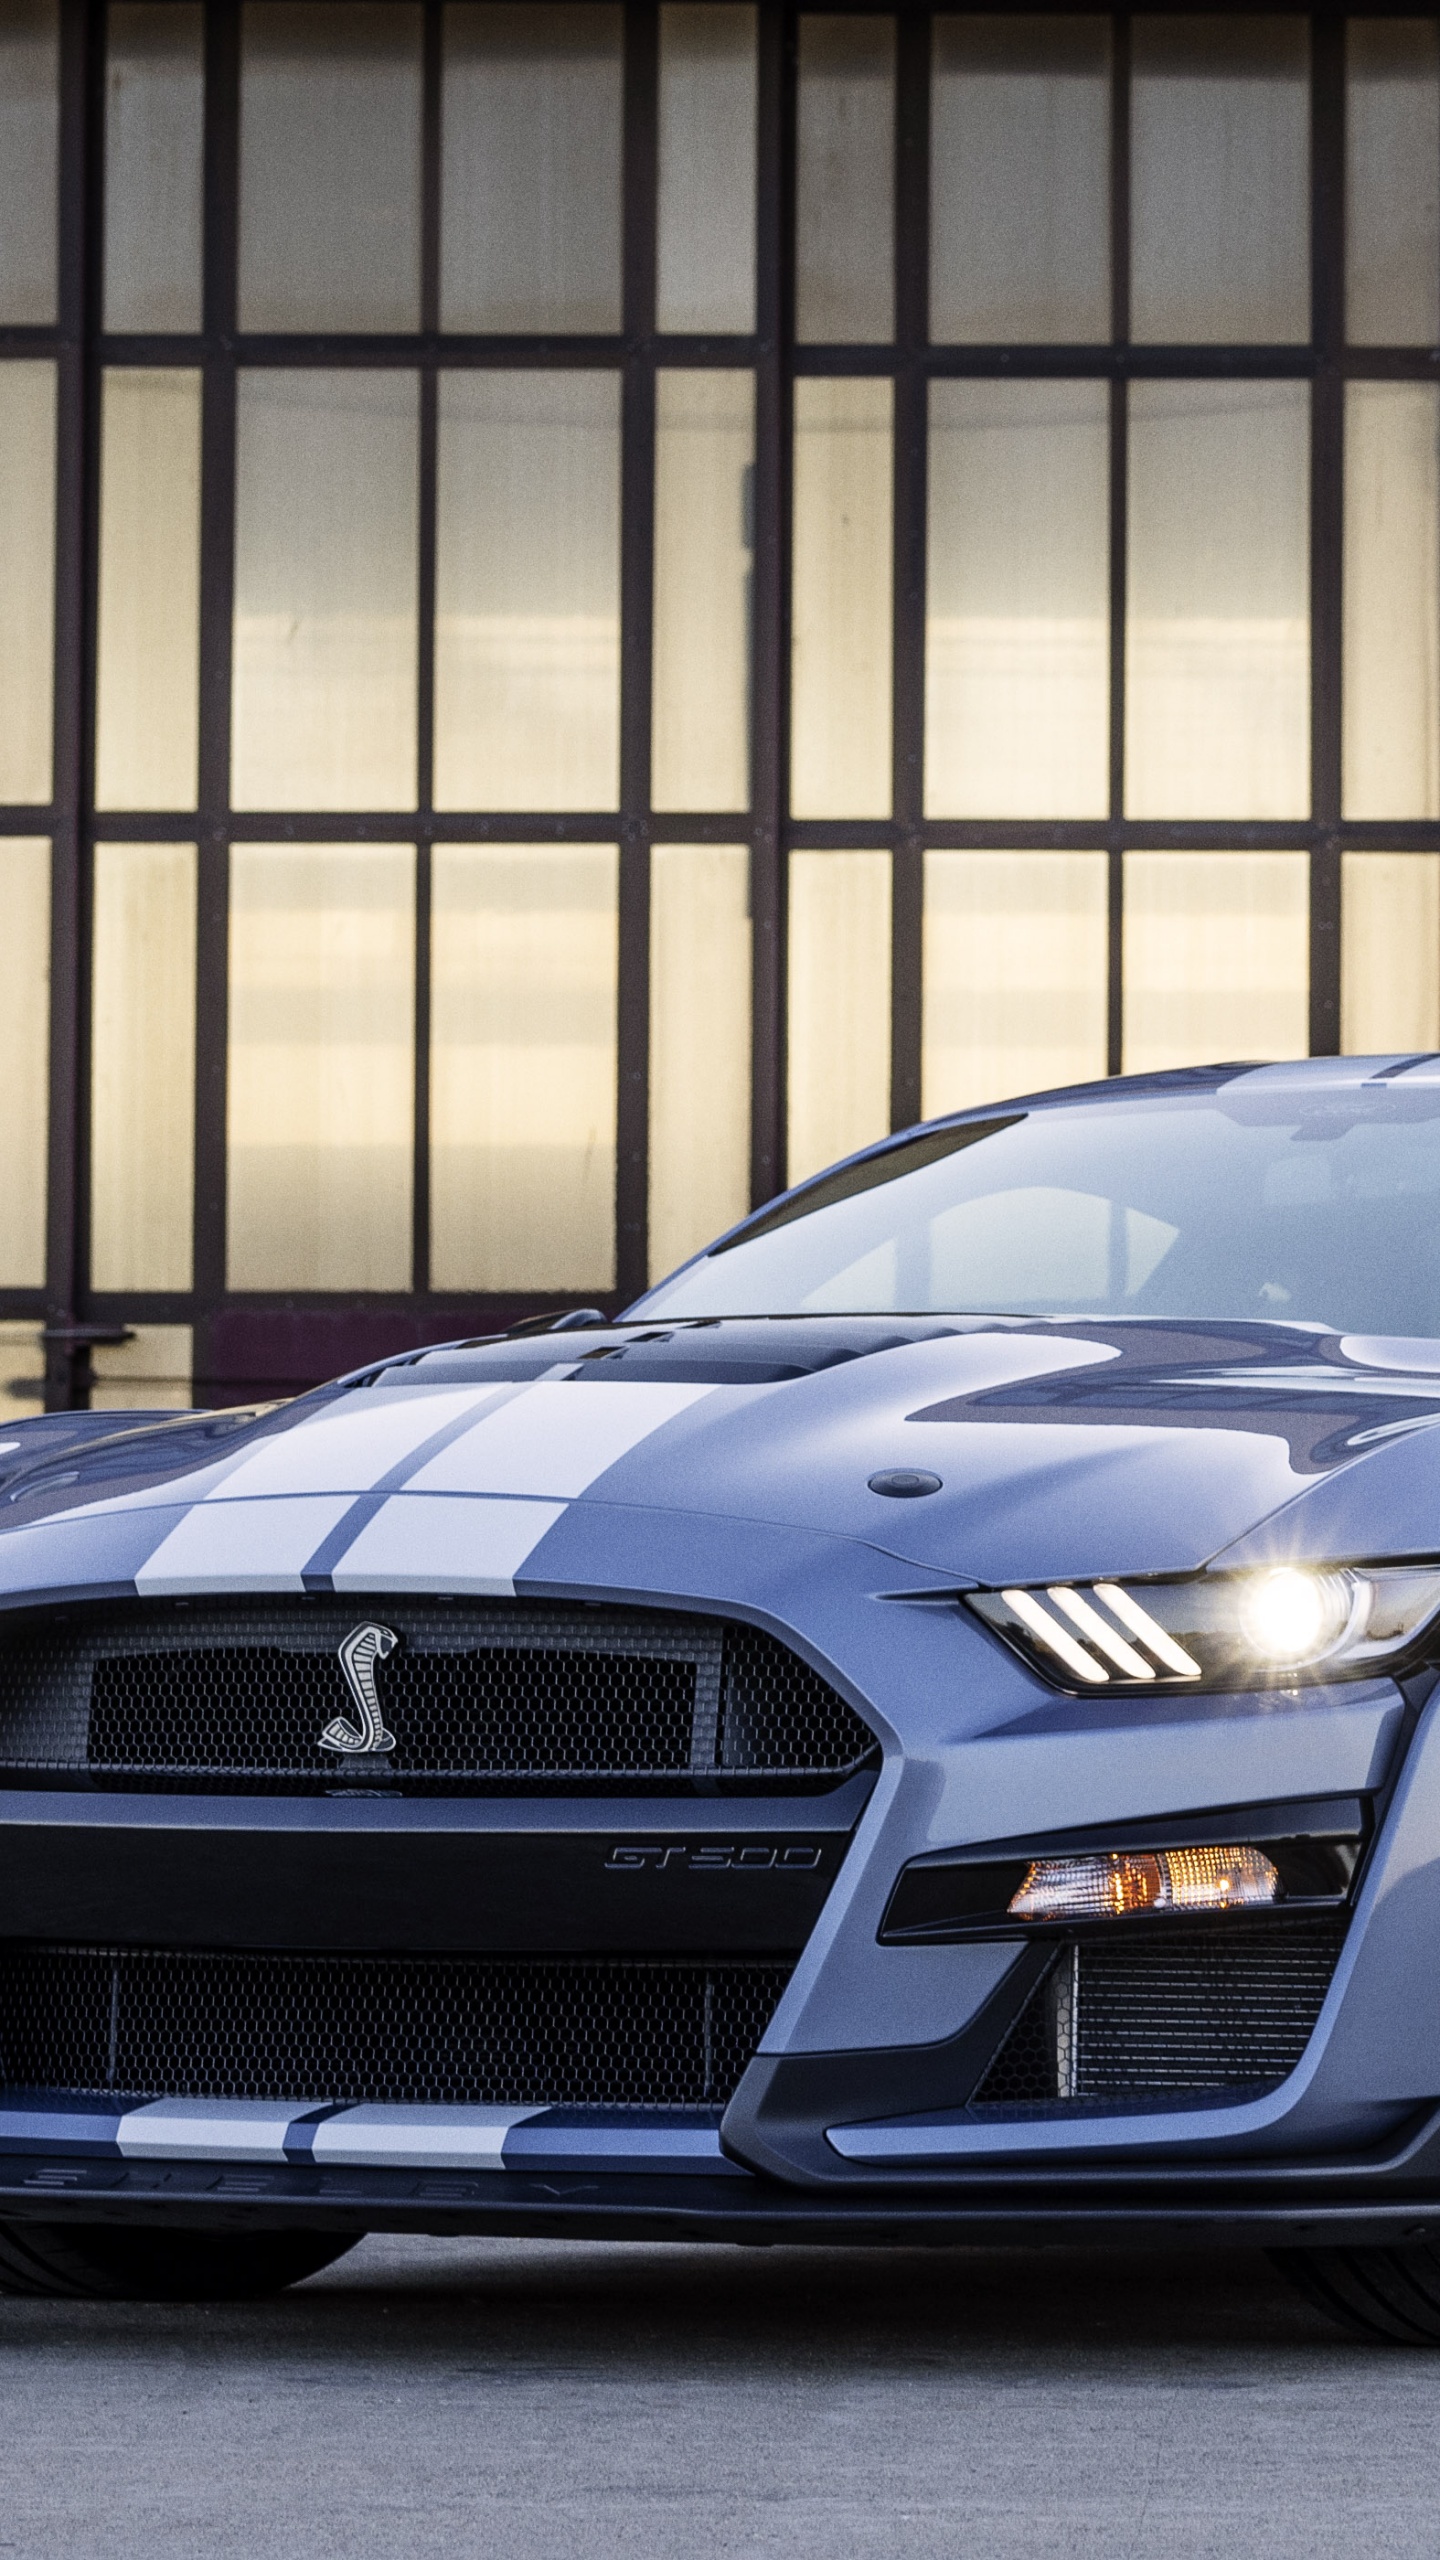 Ford Mustang Shelby GT500 Wallpaper 4K, Heritage Edition, 5K, Cars